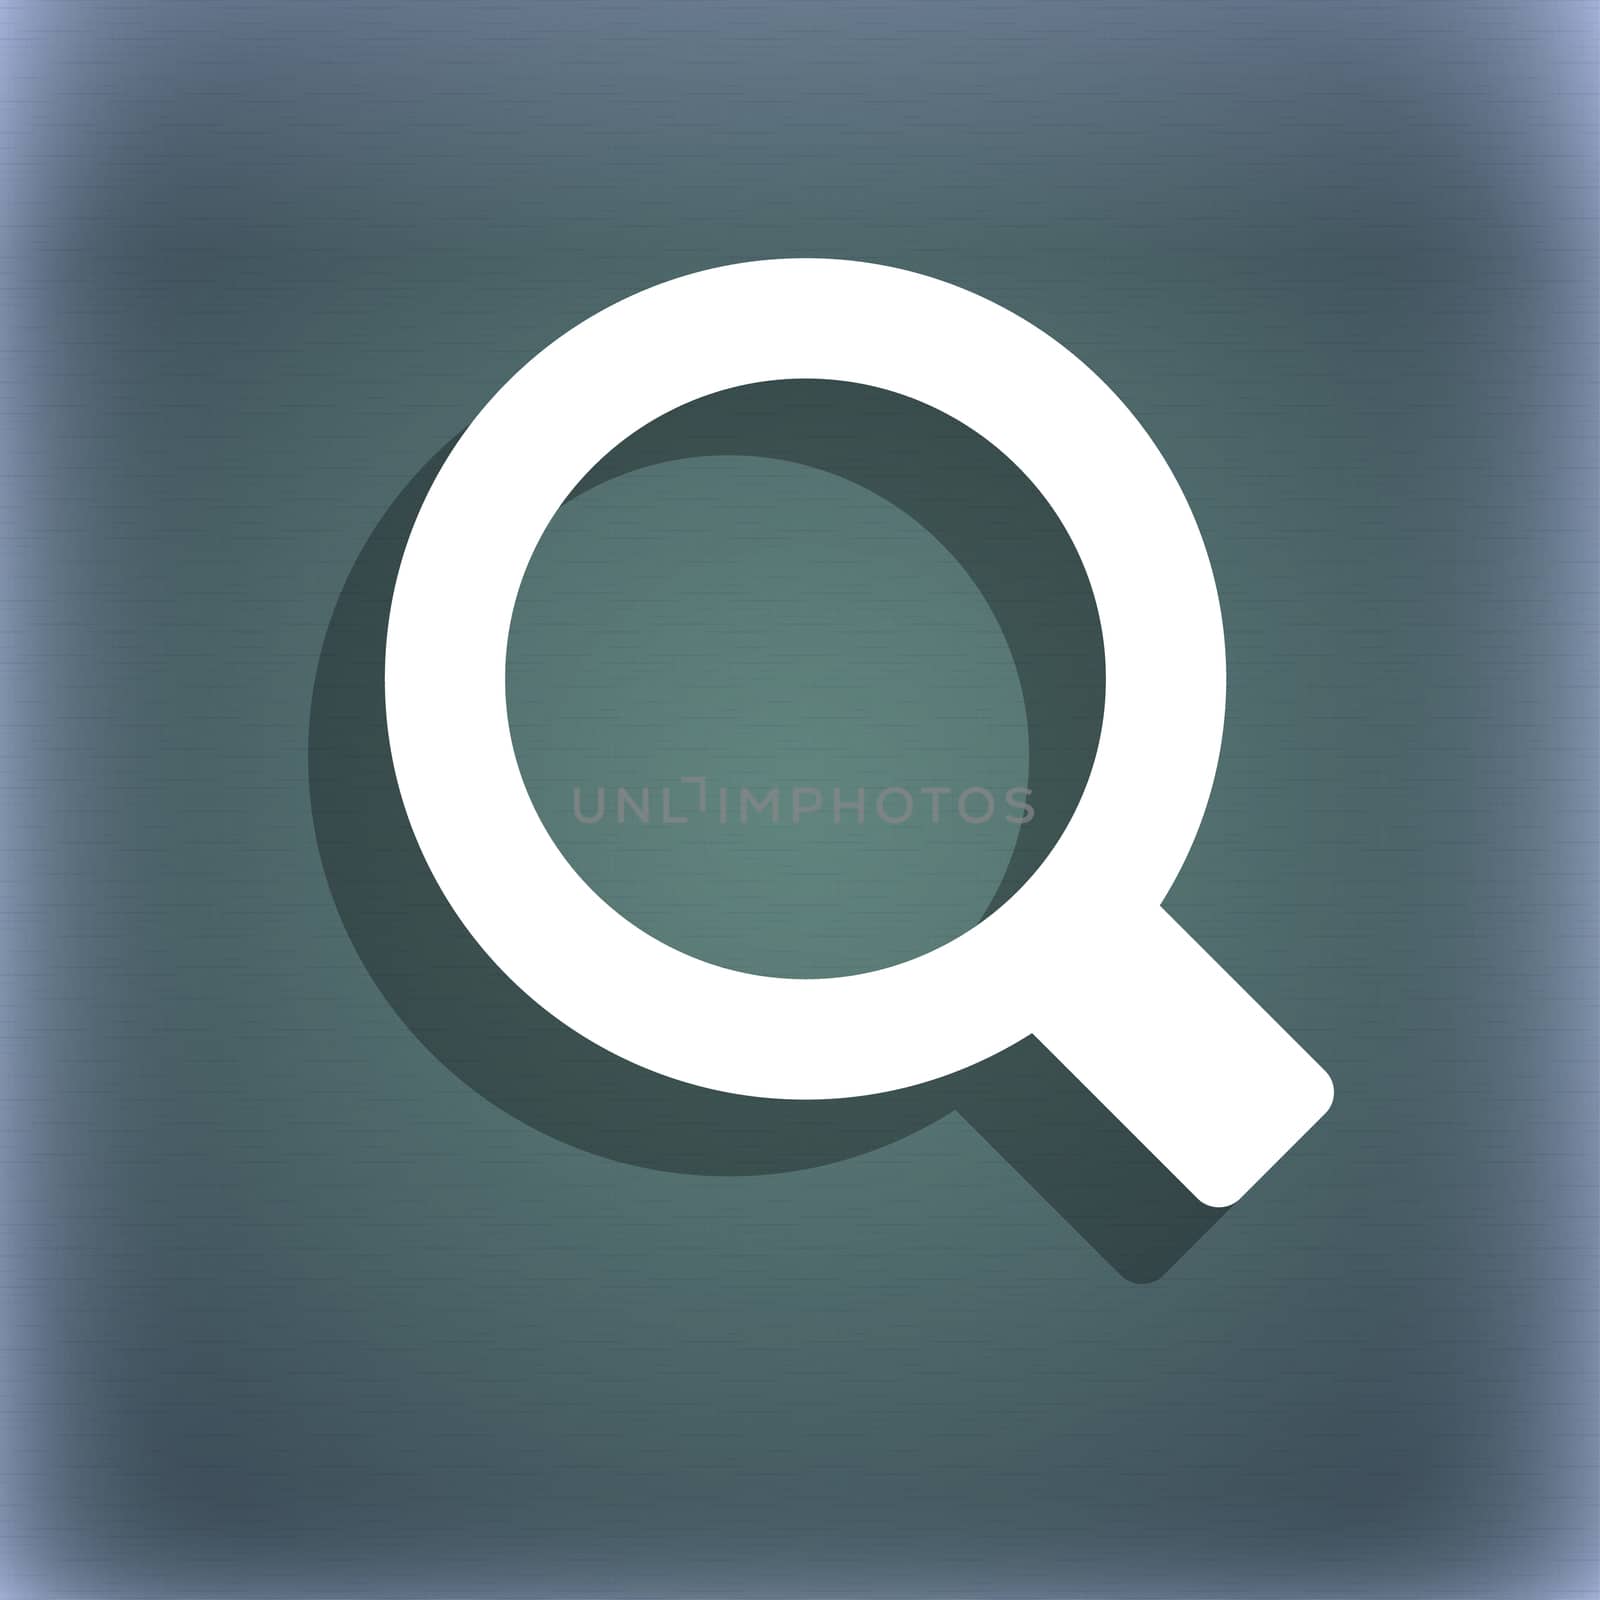 Magnifier glass icon symbol on the blue-green abstract background with shadow and space for your text. illustration